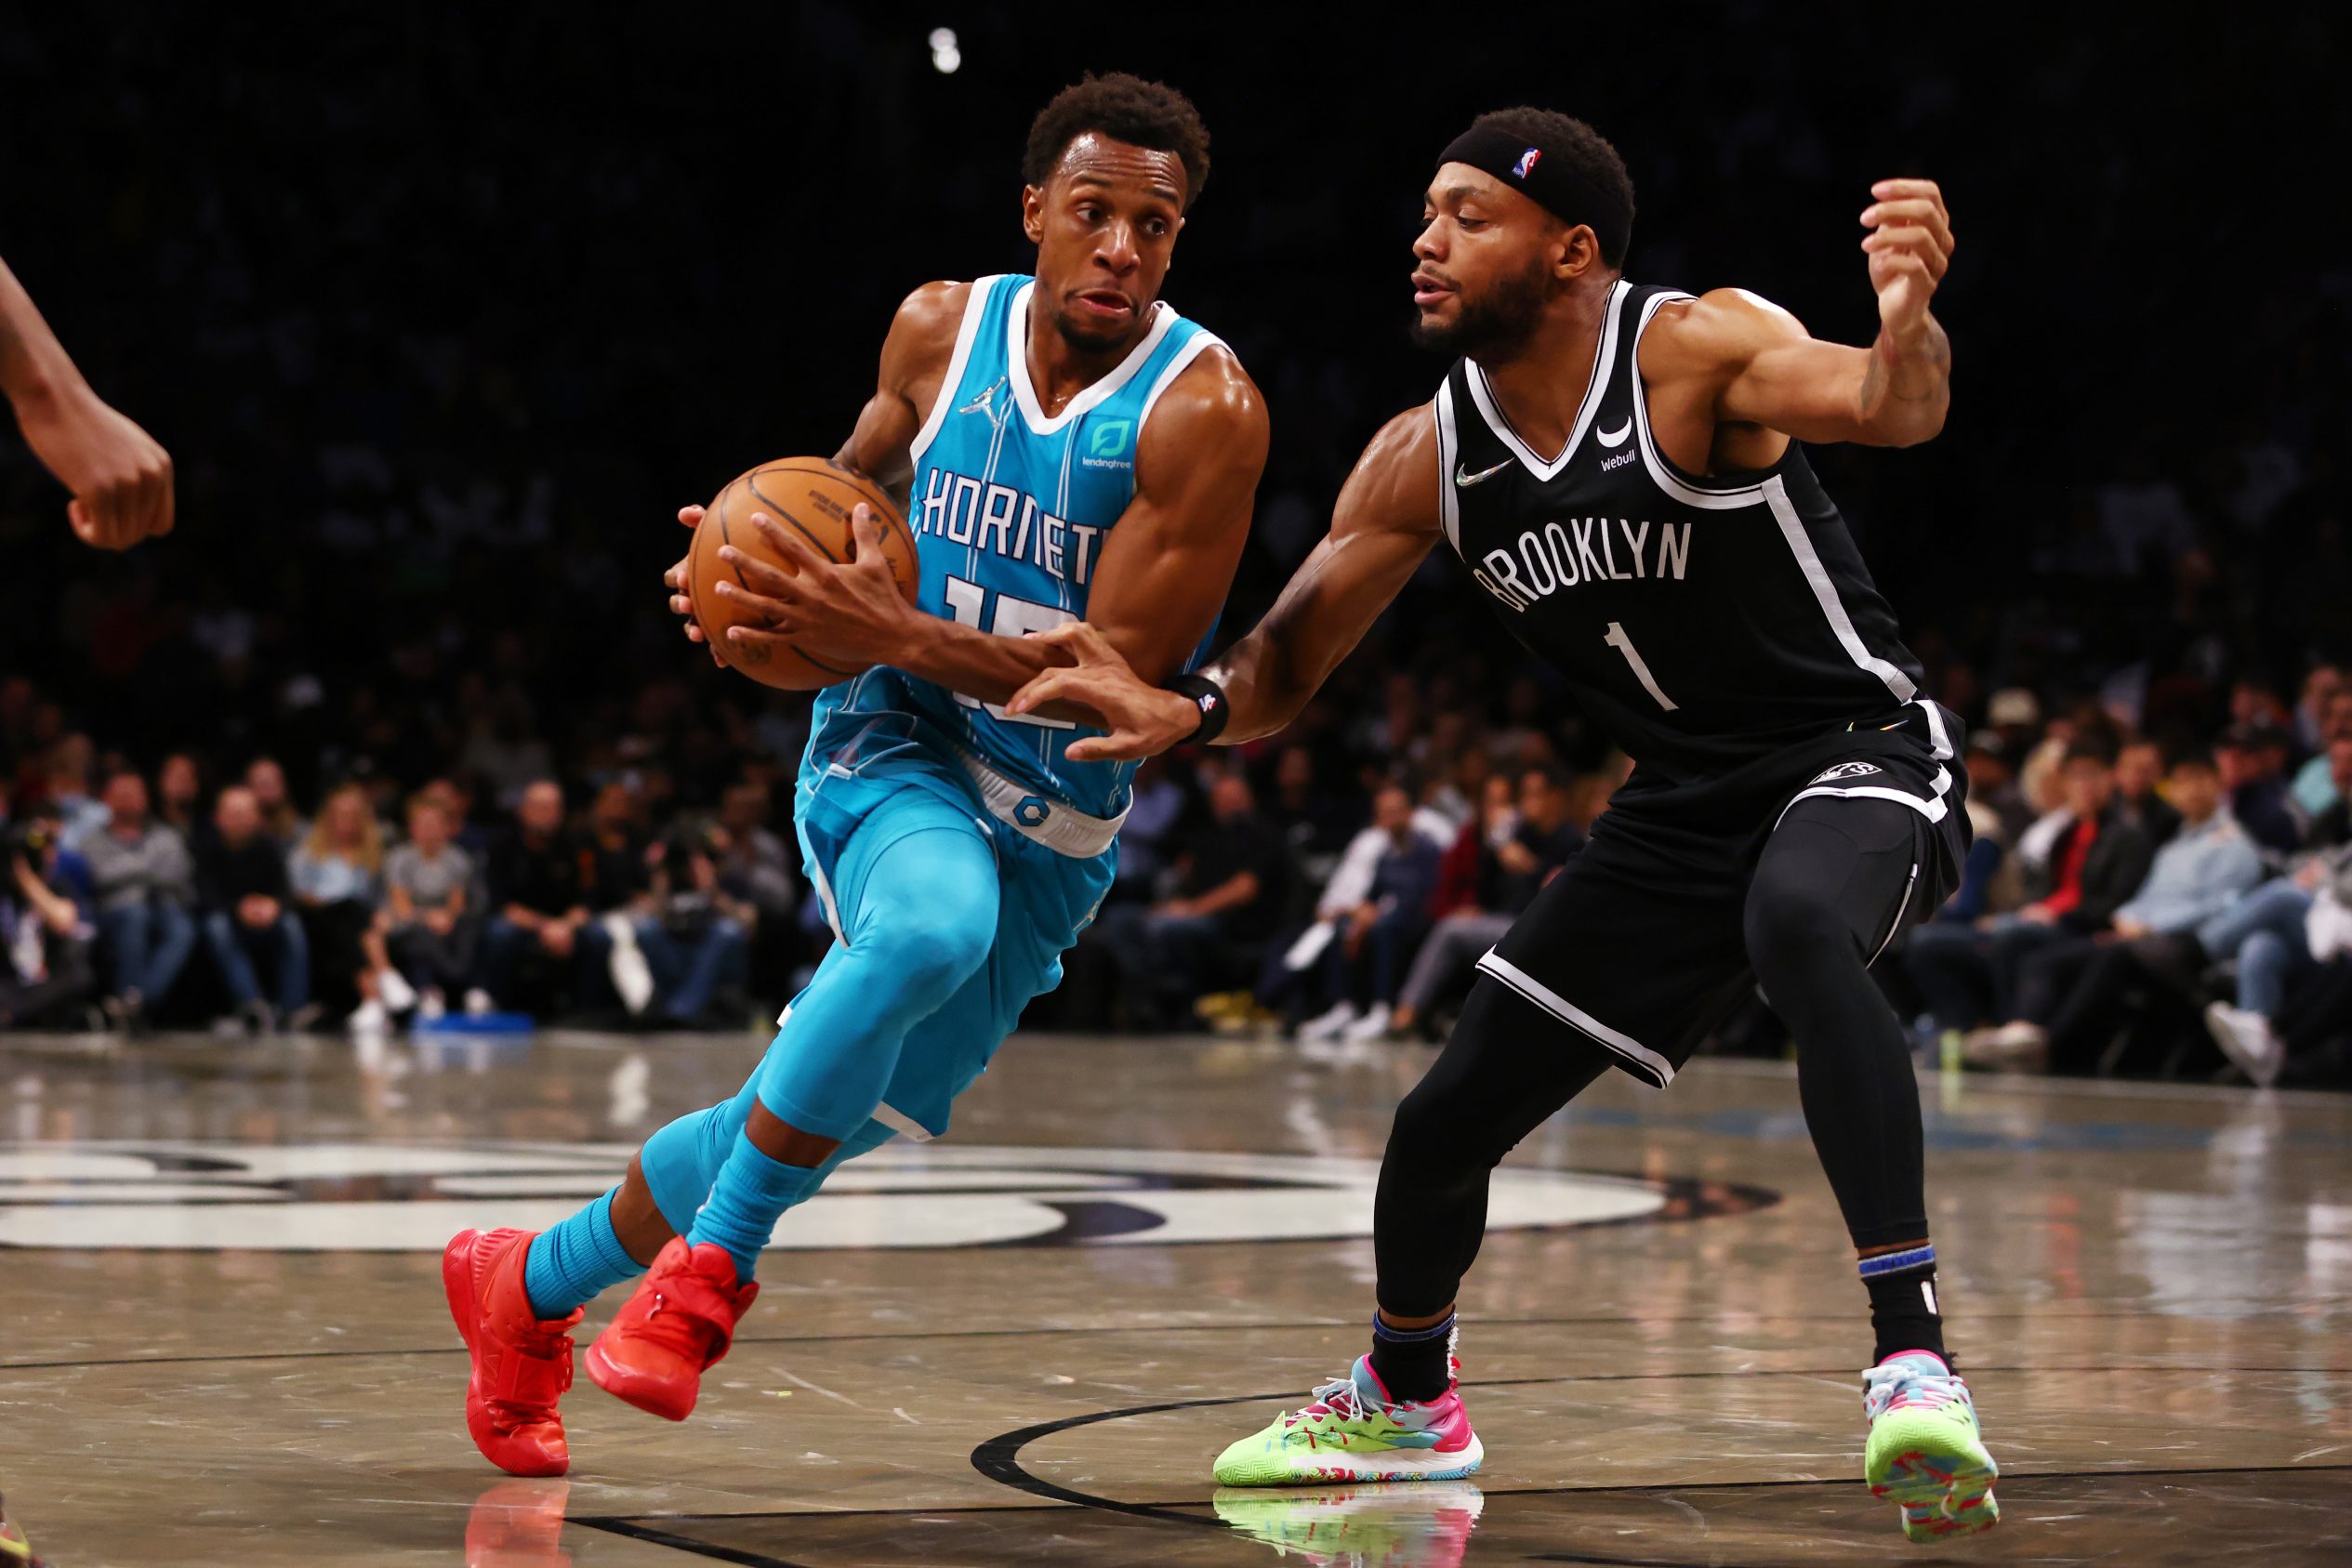 Ish Smith #10 of the Charlotte Hornets in action against Bruce Brown #1 of the Brooklyn Nets during a game at Barclays Center on October 24, 2021 in New York City.